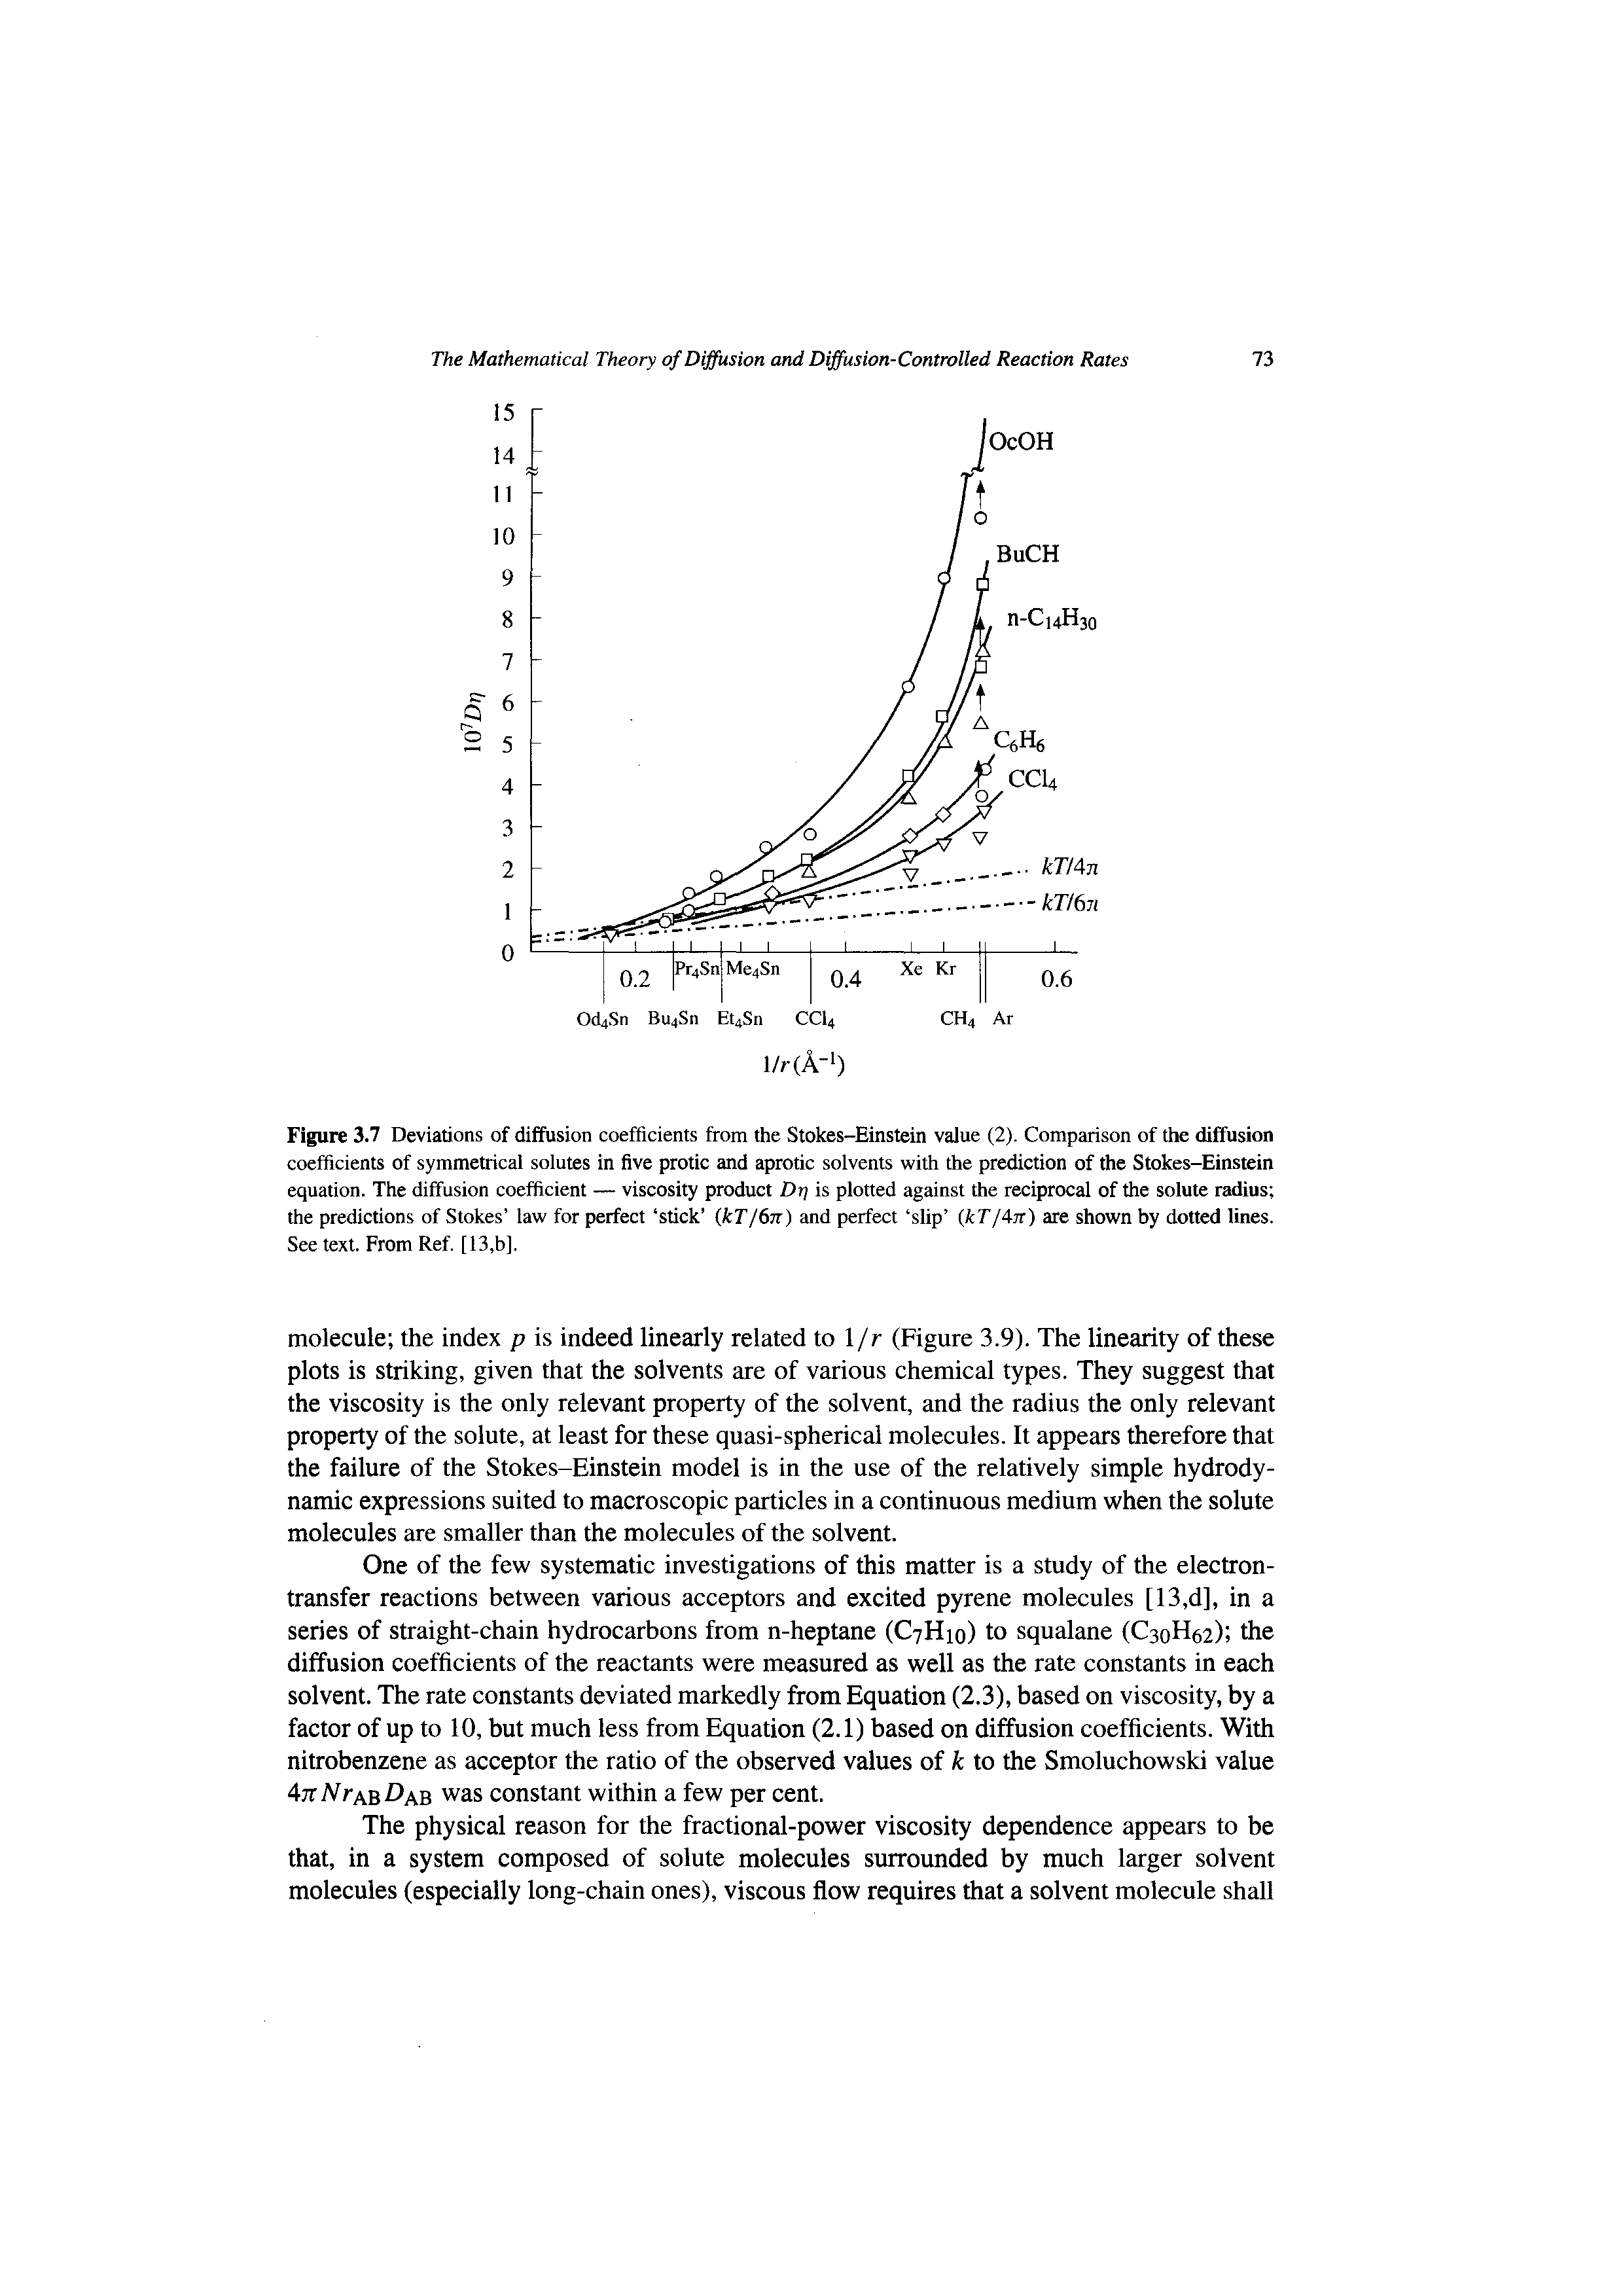 Figure 3.7 Deviations of diffusion coefficients from the Stokes-Einstein value (2). Comparison of the diffusion coefficients of symmetrical solutes in five protic and aprotic solvents with the prediction of the Stokes-Einstein equation. The diffusion coefficient — viscosity product Drj is plotted against the reciprocal of the solute radius the predictions of Stokes law for perfect stick (kT/6n) and perfect slip kT/An) are shown by dotted lines. See text. From Ref. [13,b].